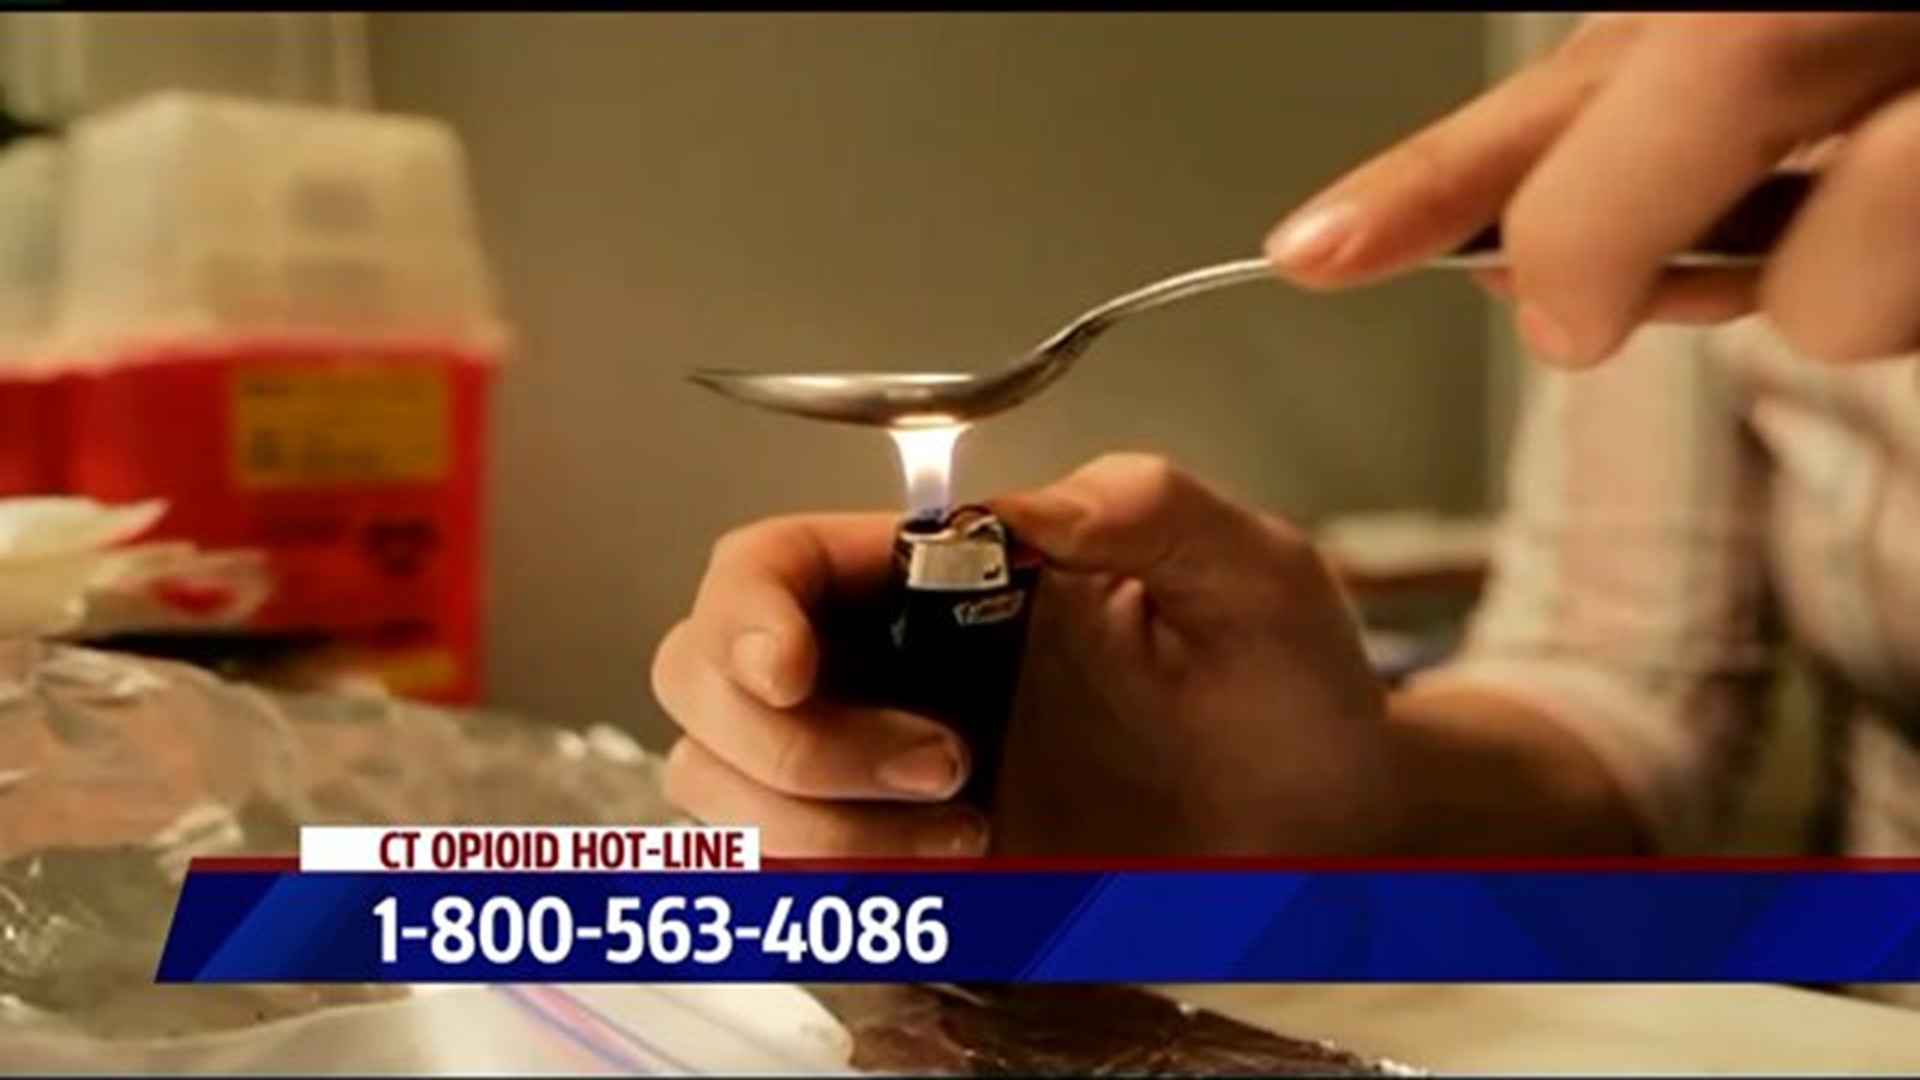 Heroin hotline promoted for those in the state who need help